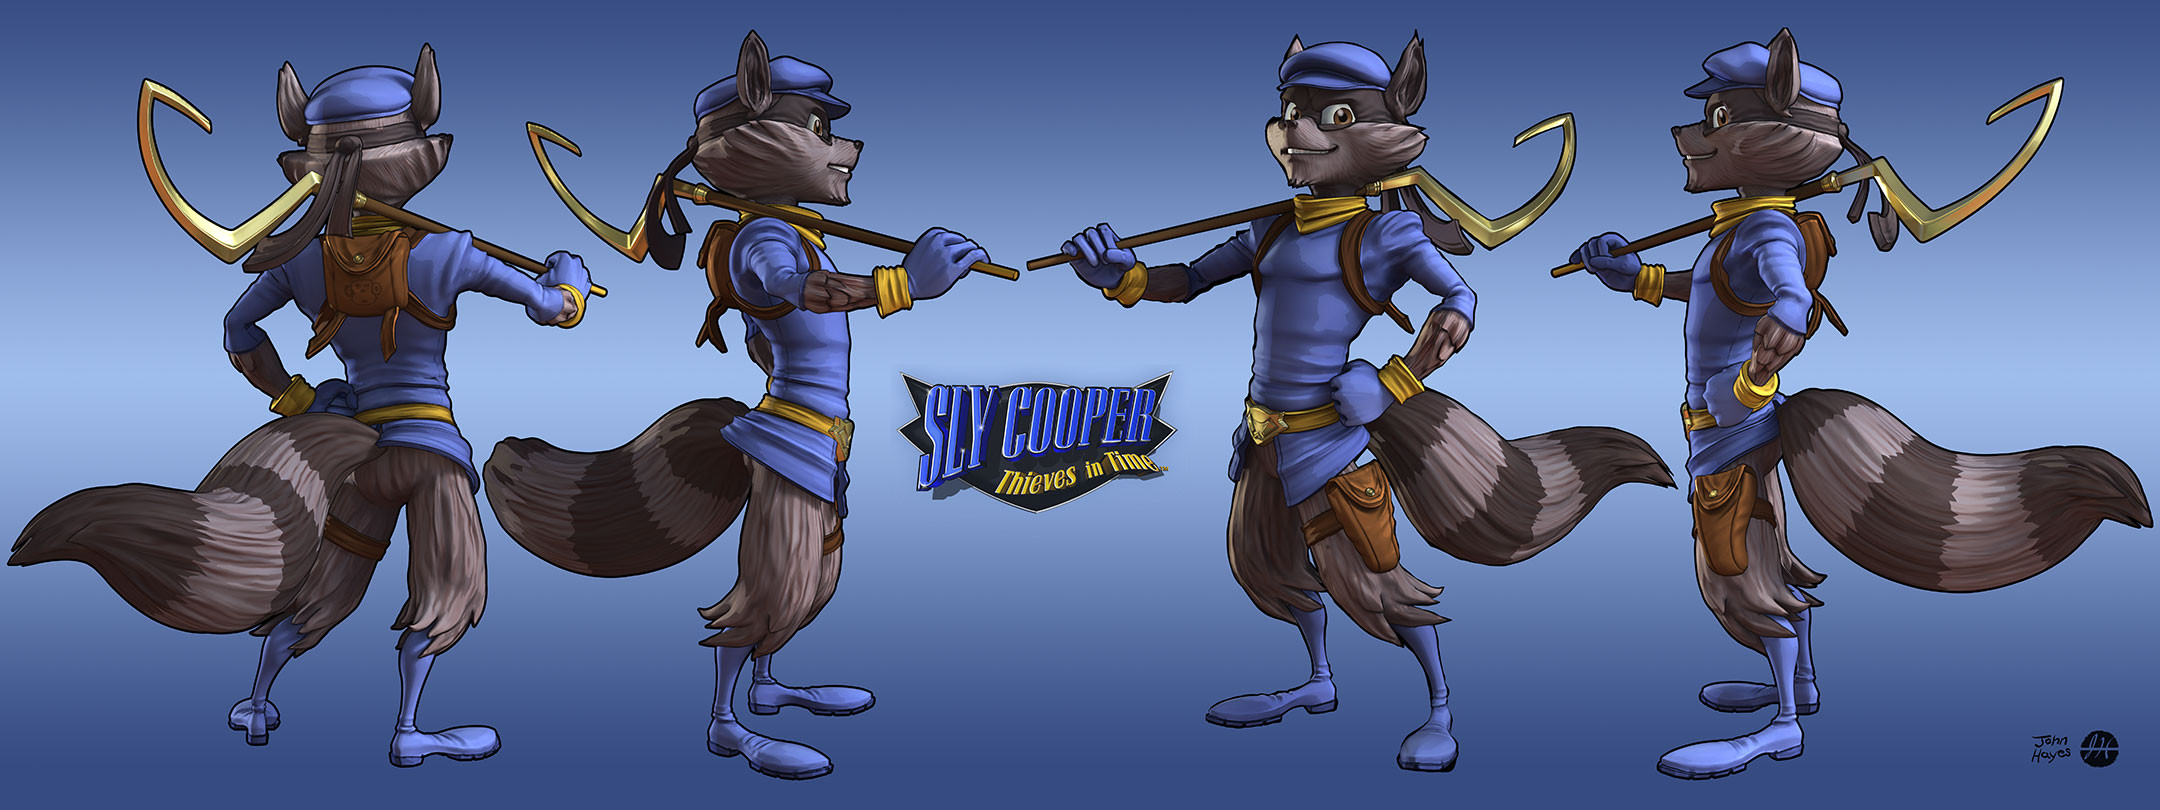 ArtStation - Sly Cooper from the game Sly Cooper: Thieves in Time